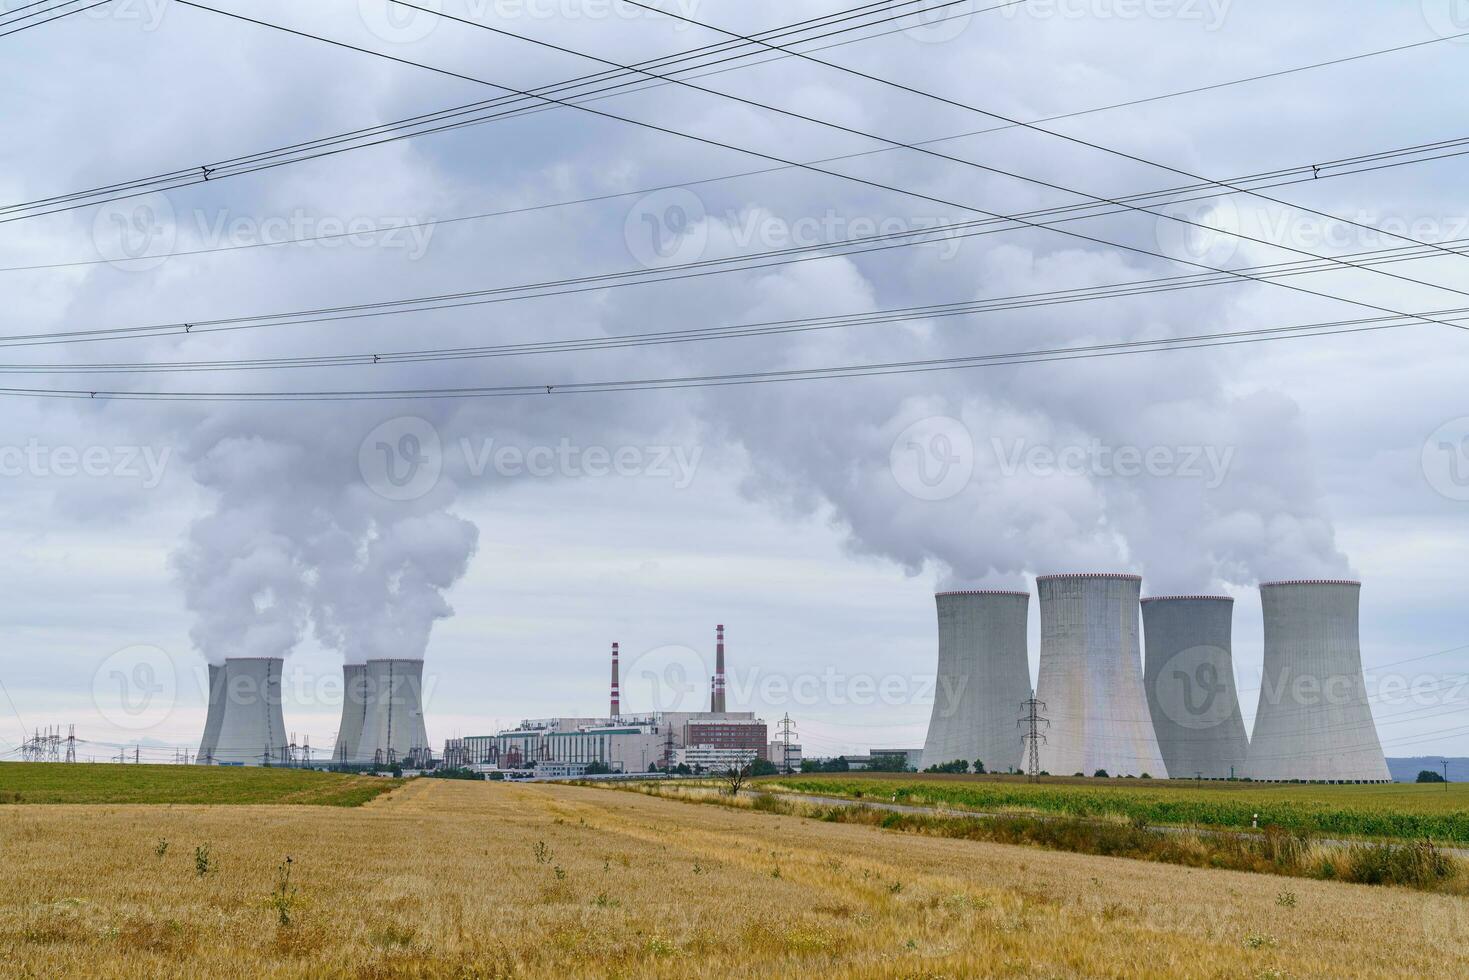 Cooling towers of a nuclear power plant. Nuclear power station Dukovany. Vysocina region, Czech republic, Europe. photo